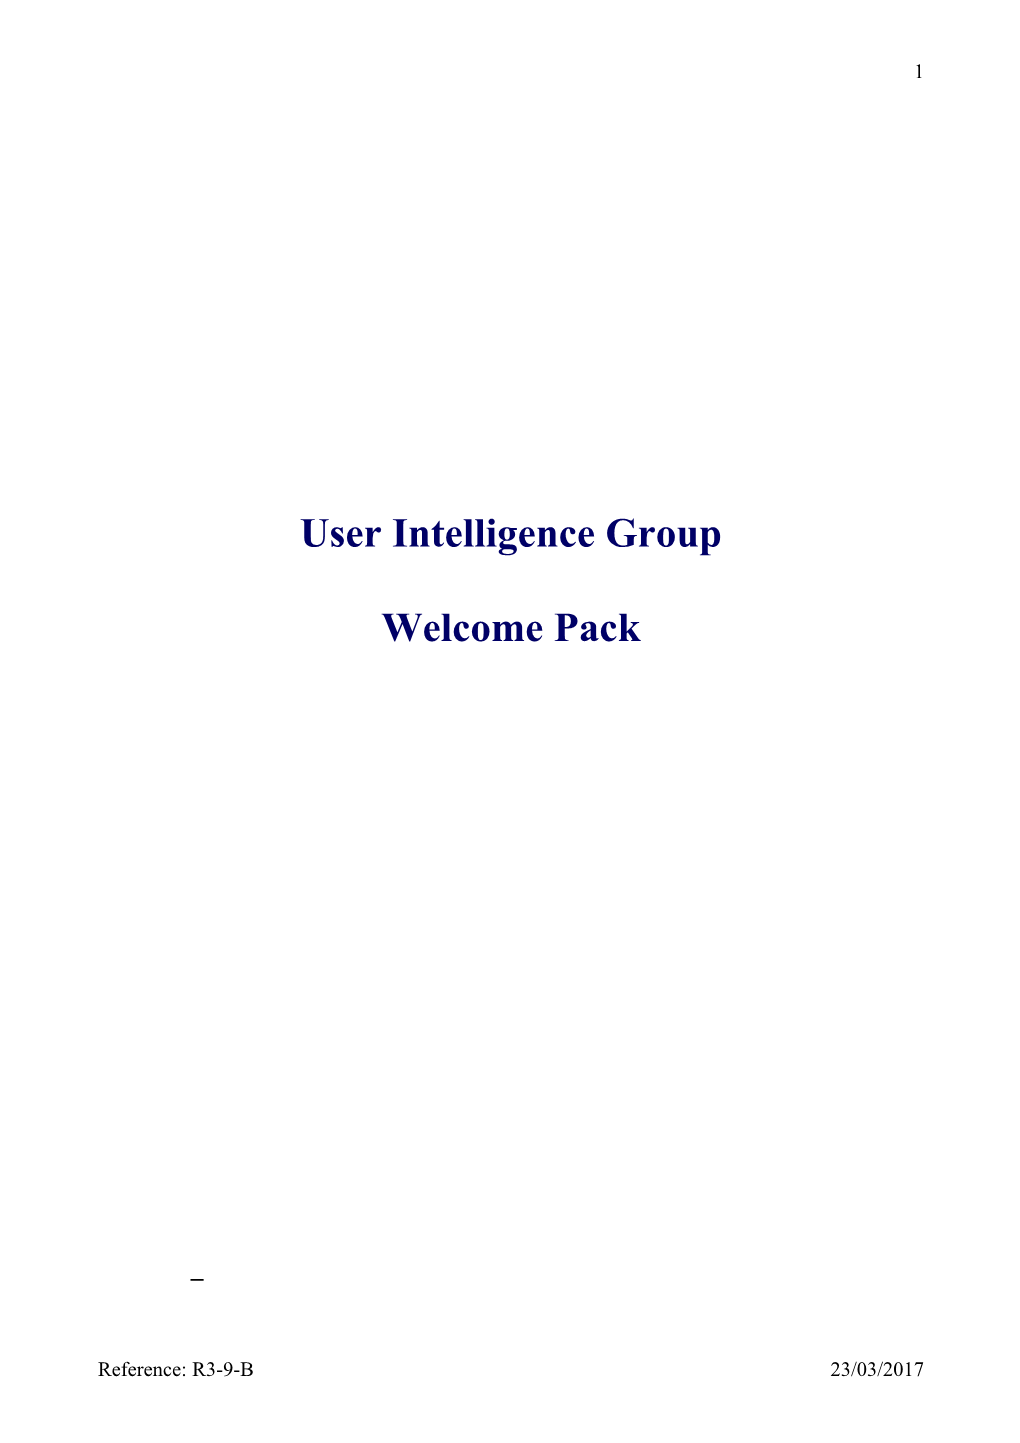 User Intelligence Groups Terms of Reference